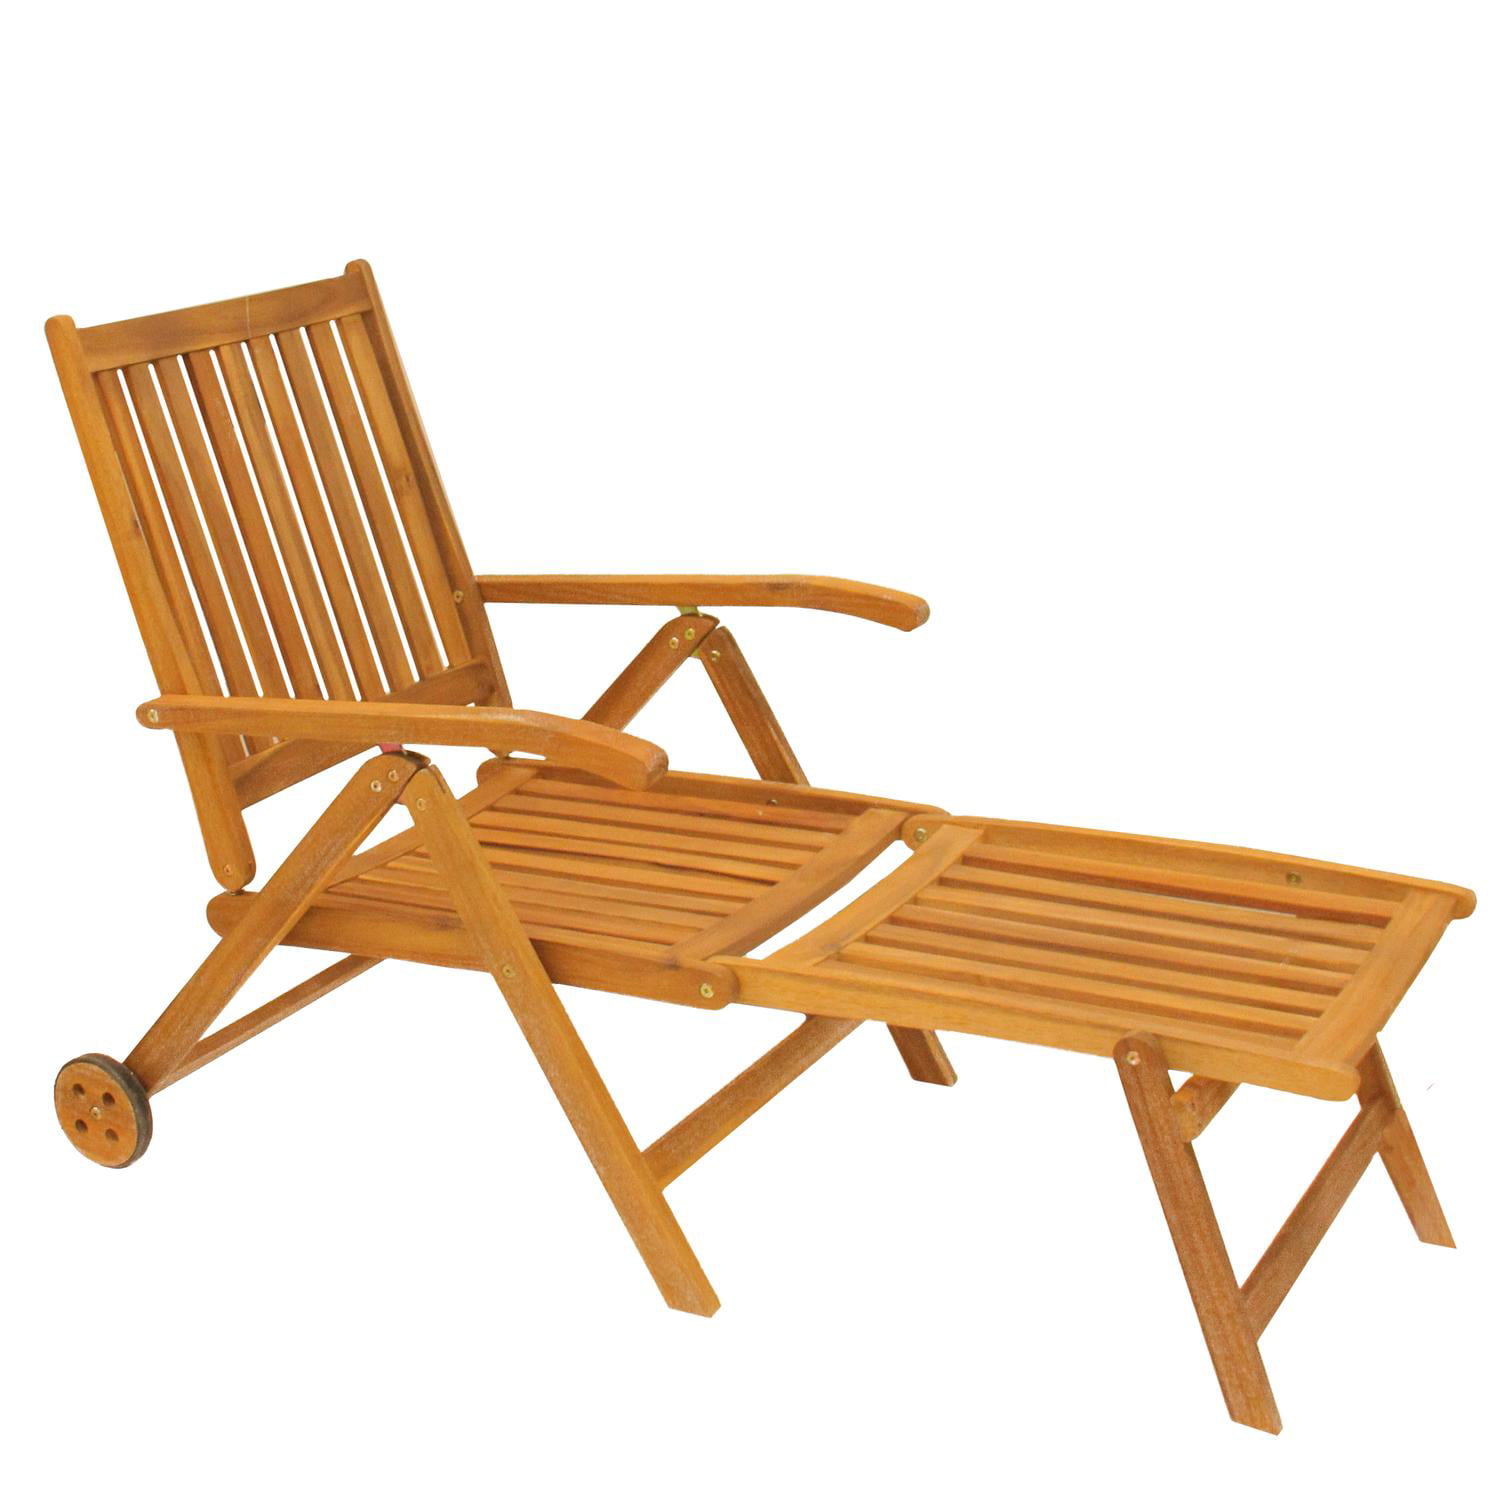 55" Acacia Wood Outdoor Patio Chaise Lounge Chair ...